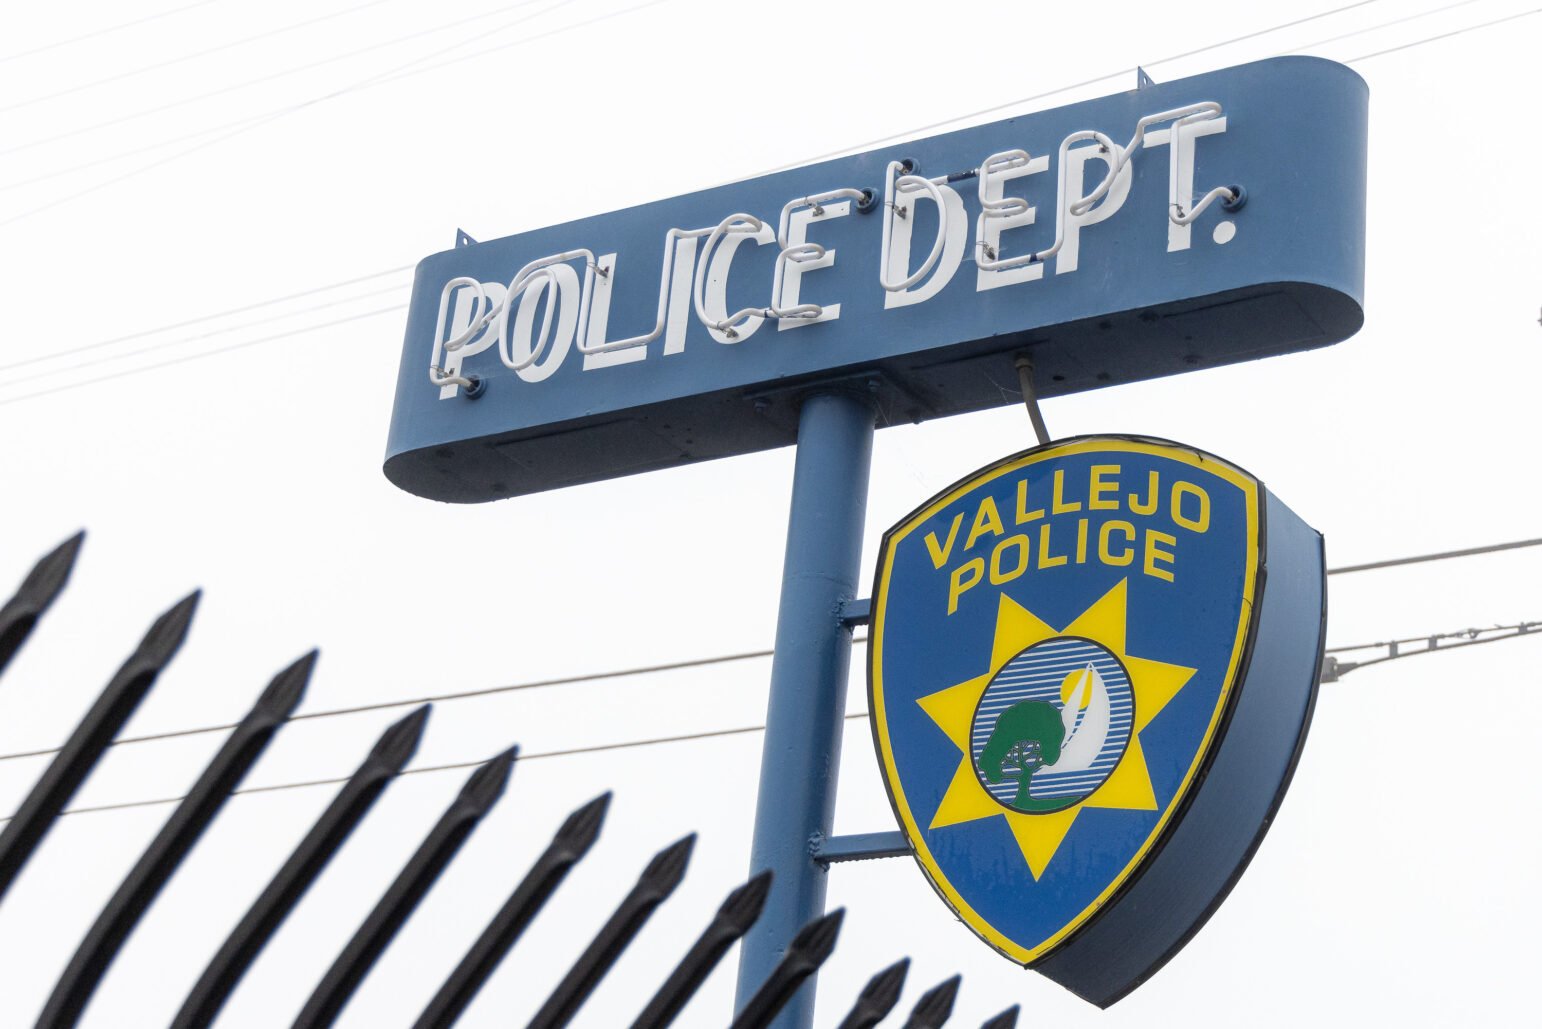 The neon Vallejo Police Department sign, with a lighted pendant reading, "Vallejo Police" below it, framed by sharpened, curved iron bars.